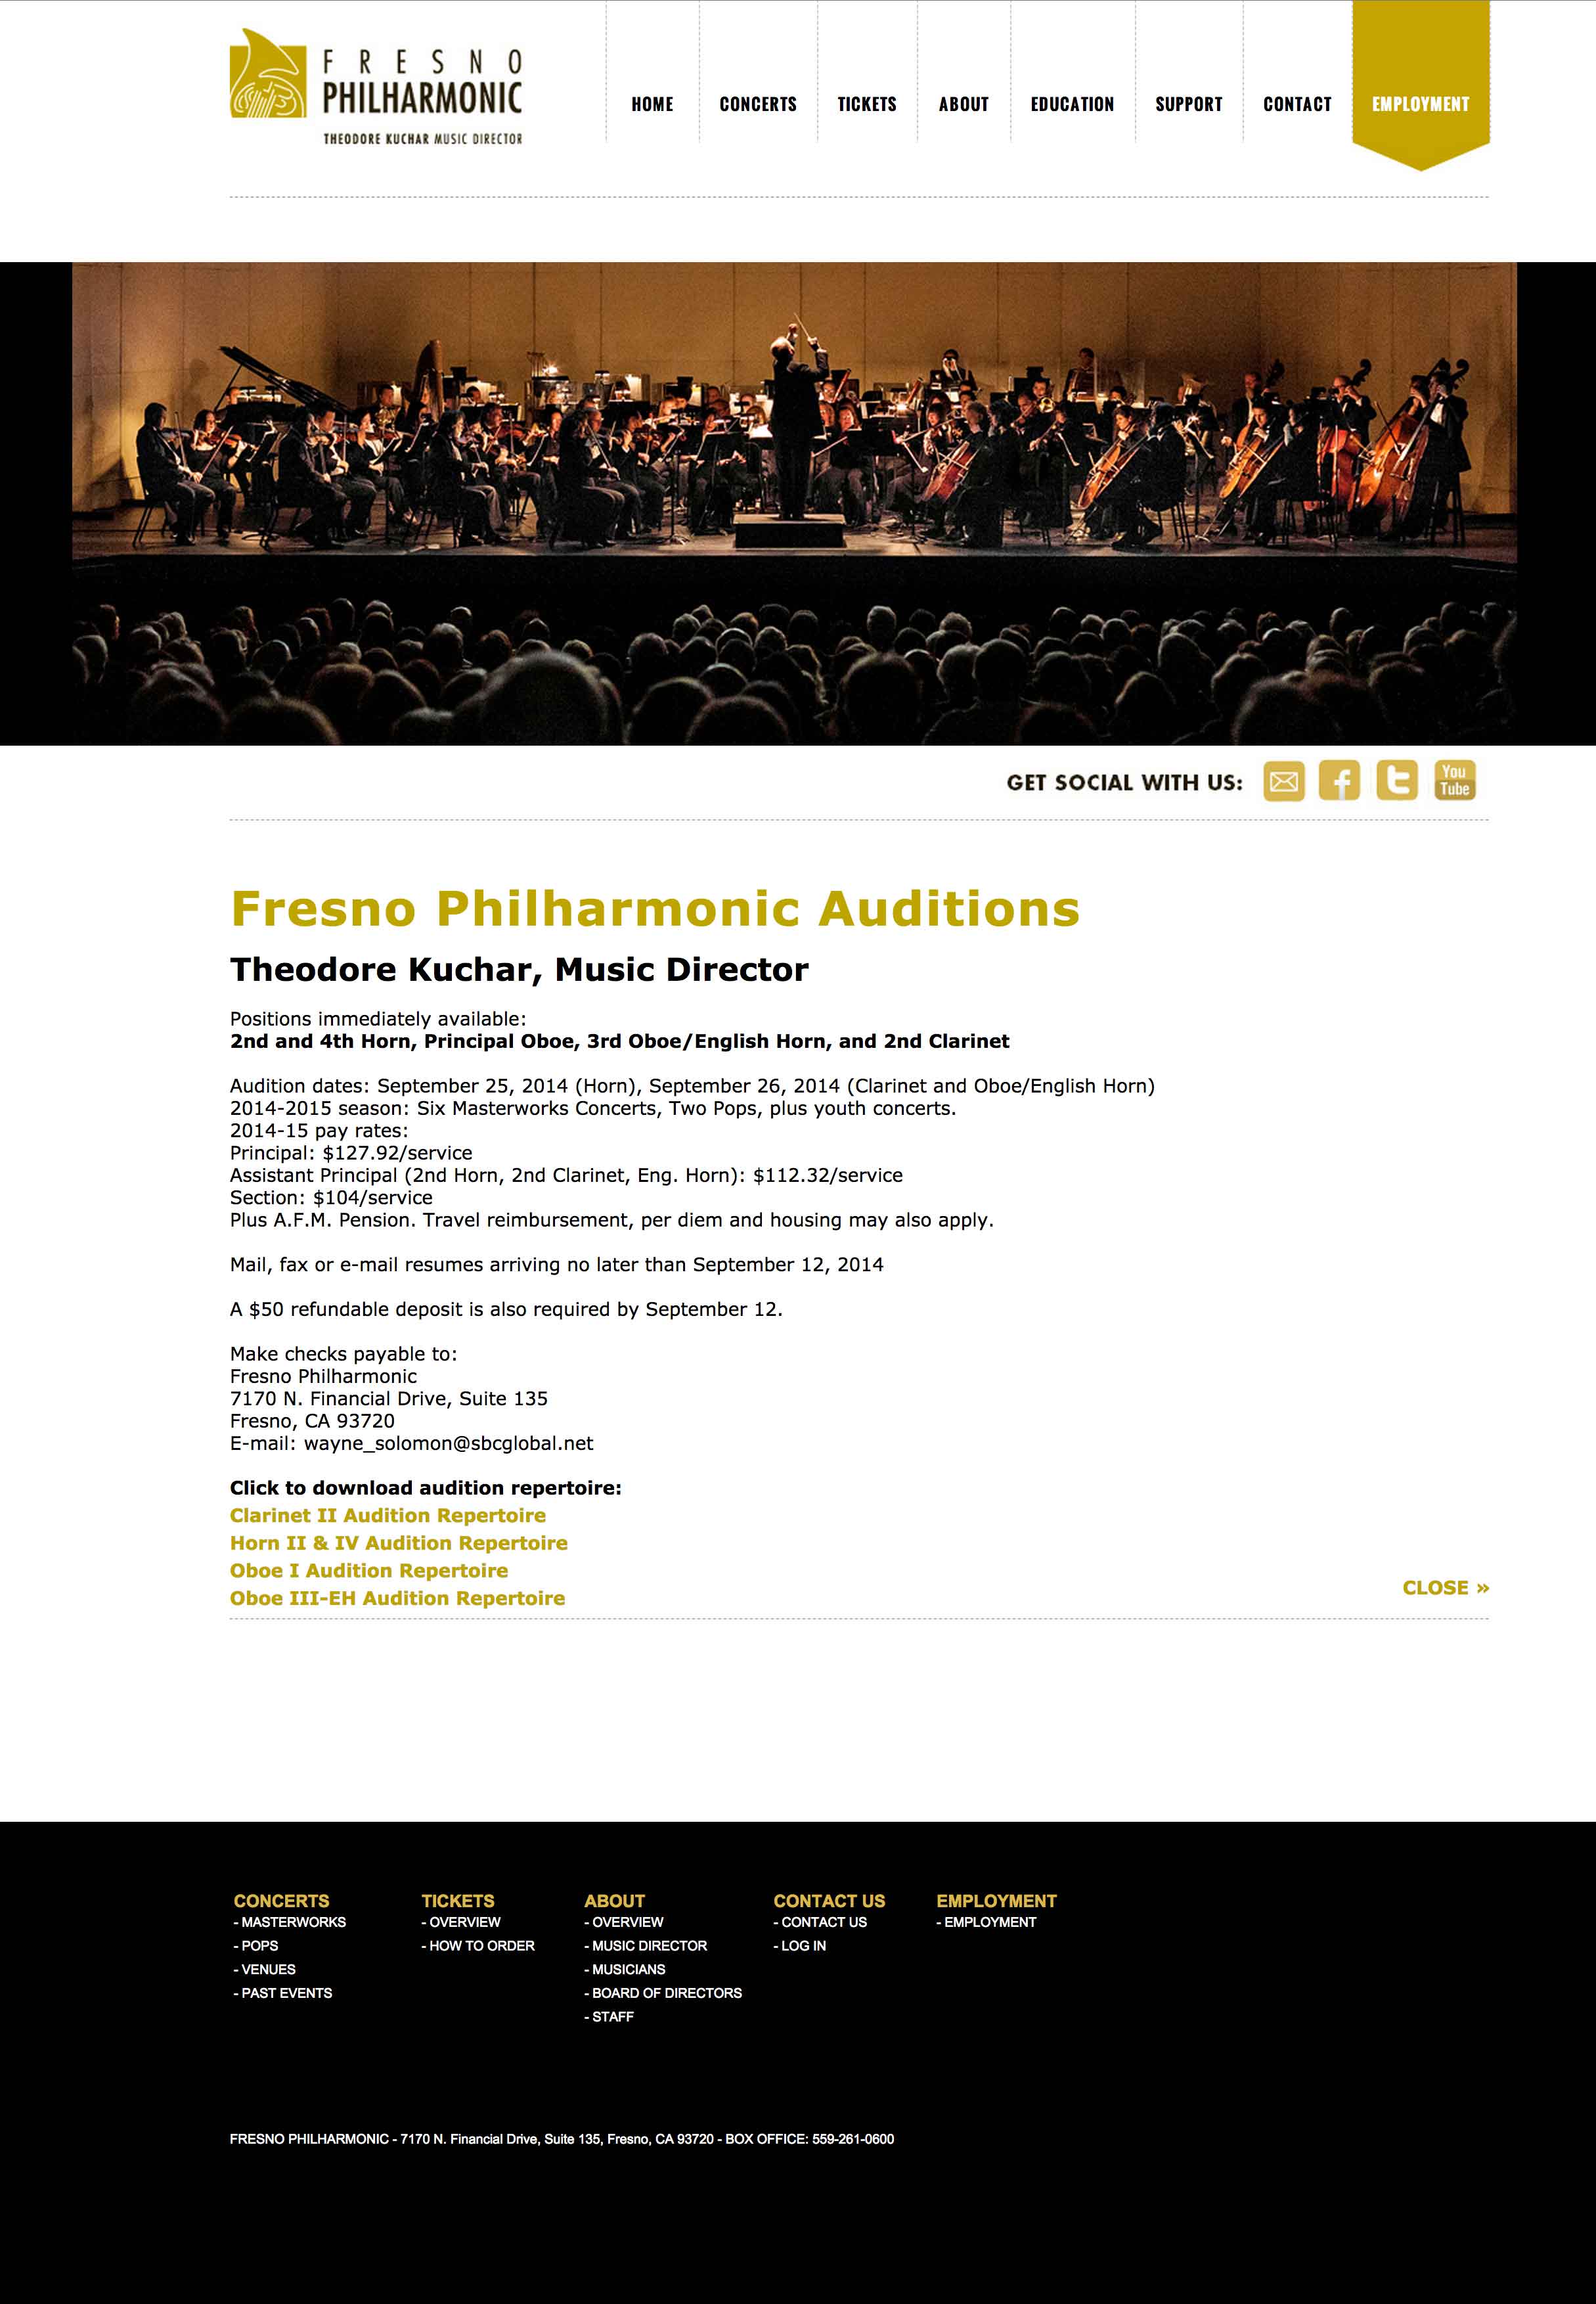 Screen shot of the Fresno Philharmonic web site by Lee Powers.